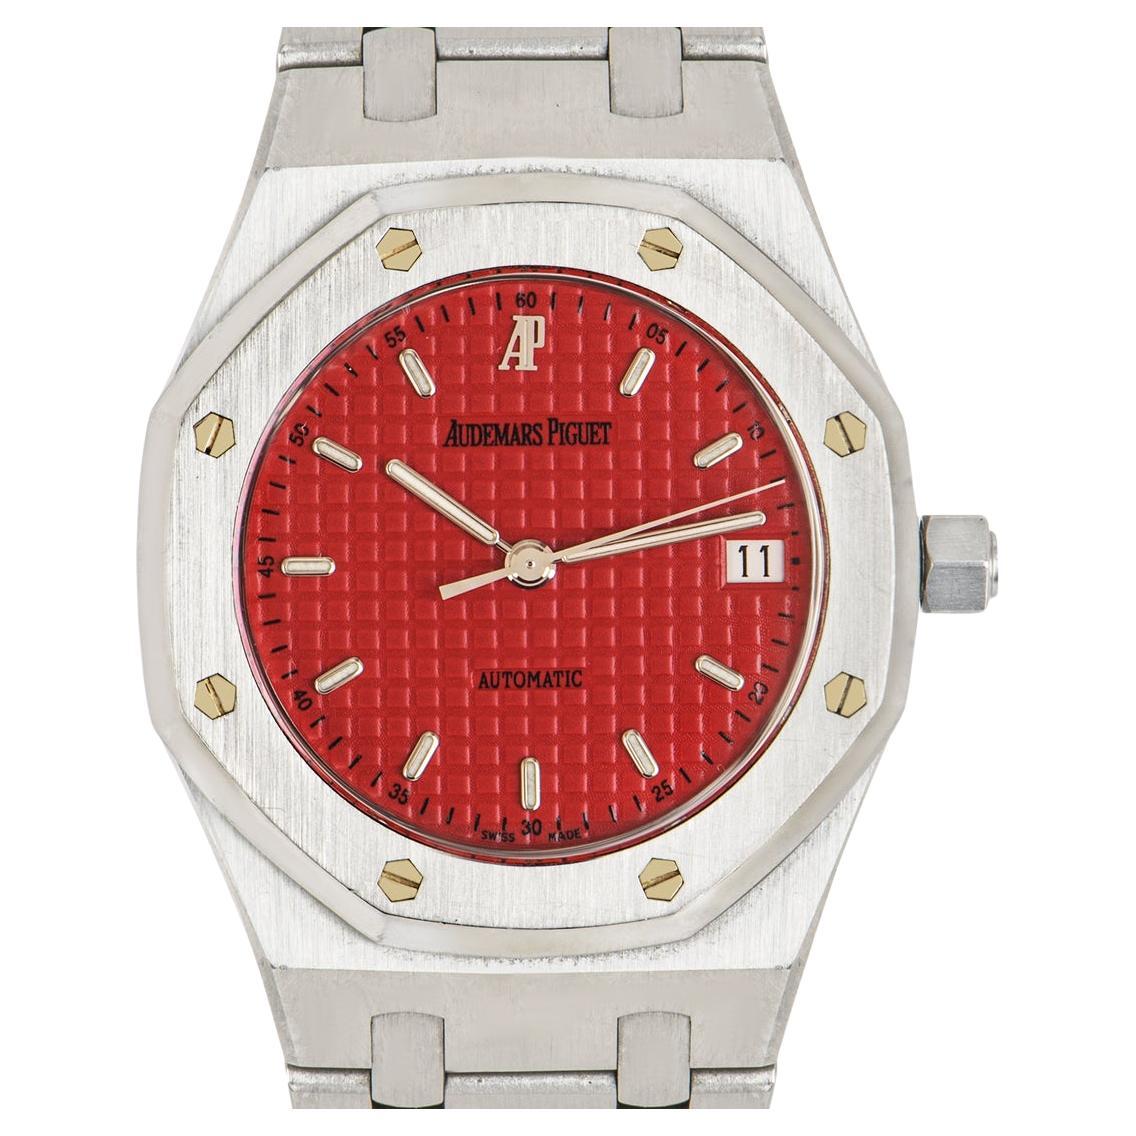 One of the rarer 14790's, this stainless steel Royal Oak by Audemars Piguet is a third series model, being produced from around 2000 to 2005. With only a handful being made for Ferrari and coming to market, believed to be as little as 10, this